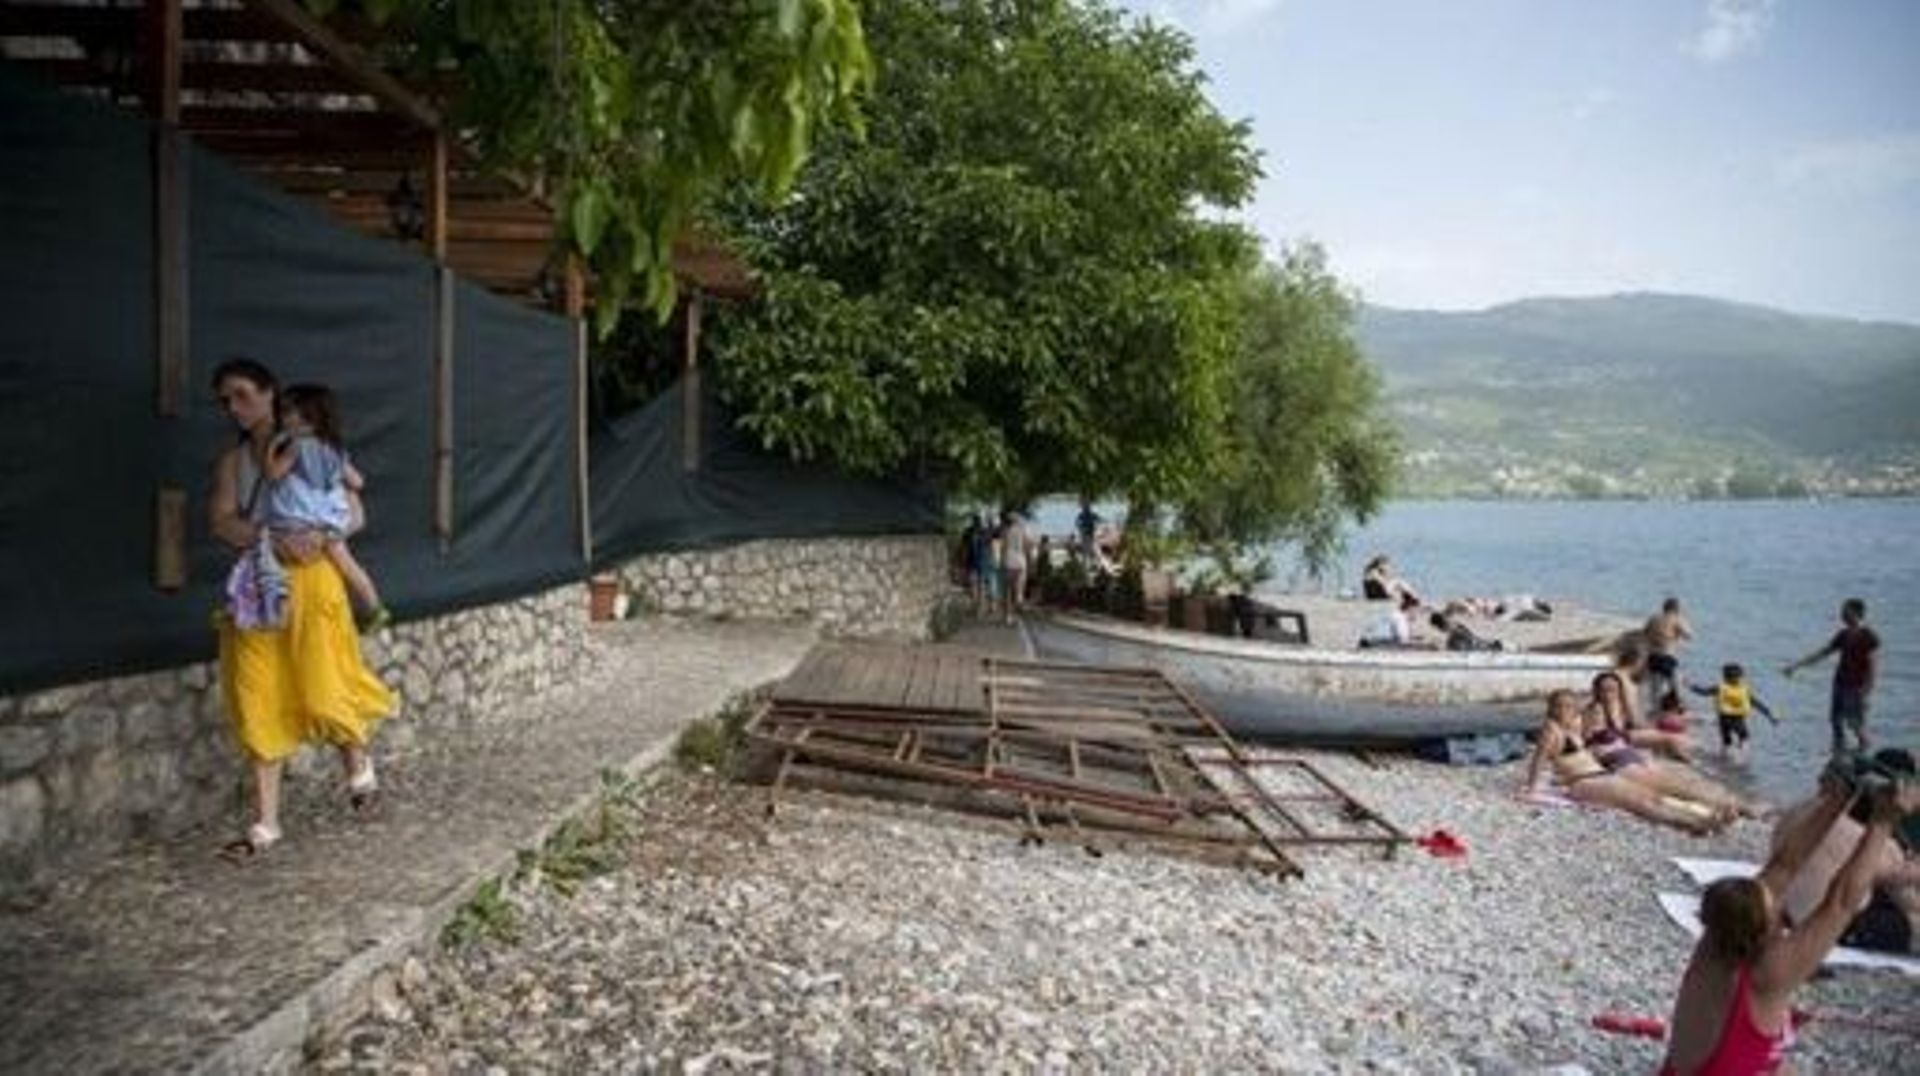 Local residents sunbathe nearby rubbish left after the demolition of an illegal structure on the shore of the Lake Ohrid, southwestern of the Republic of North Macedonia, on June 22, 2021. UNESCO has said the site, which straddles the border between North